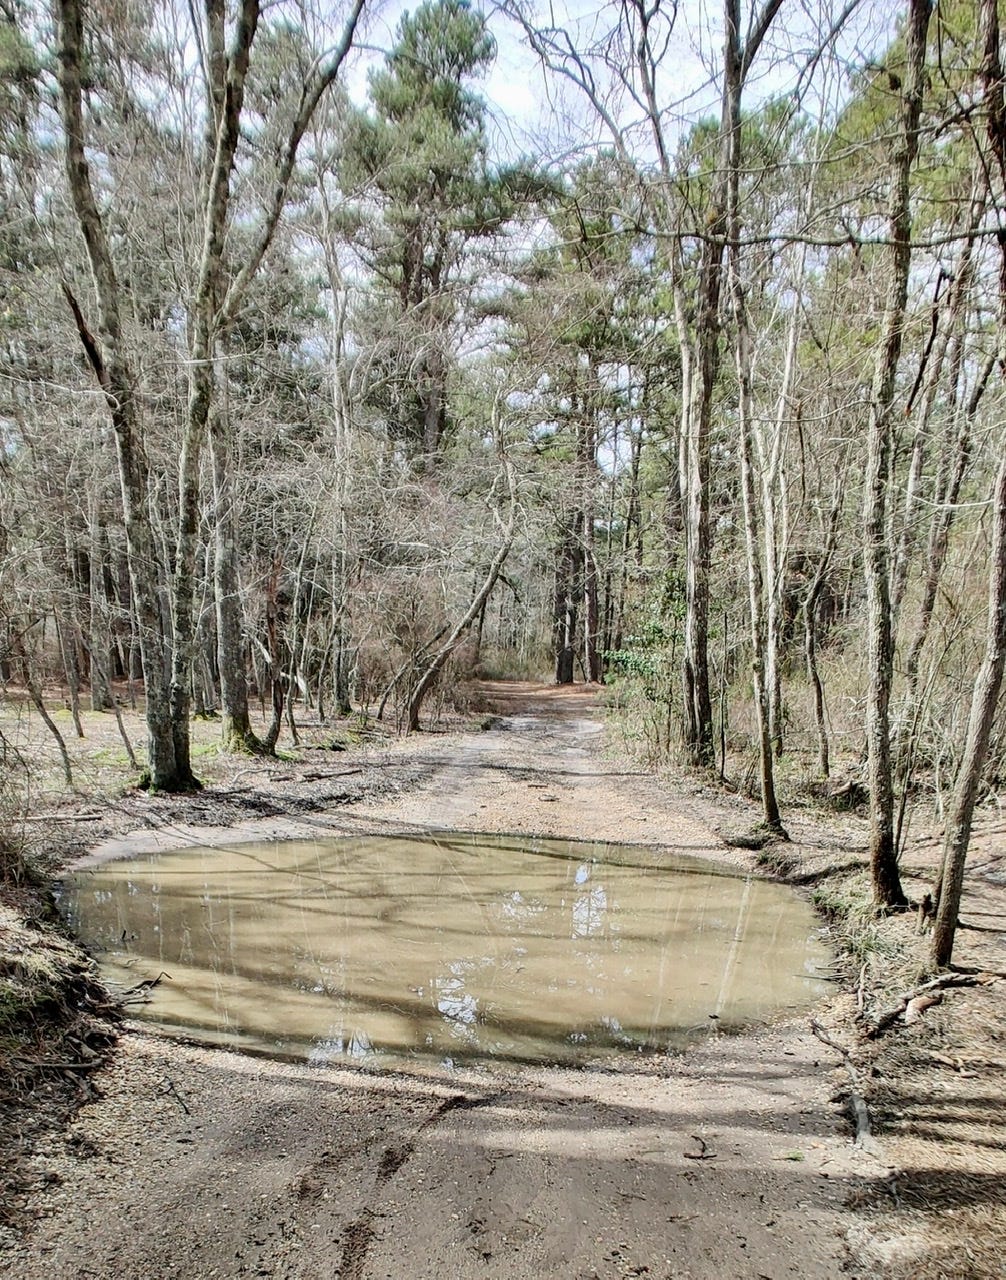 A puddle that completely fills a hiking trail in the pine barrens, a murky brown pool on a barren trail lined with tall pines.